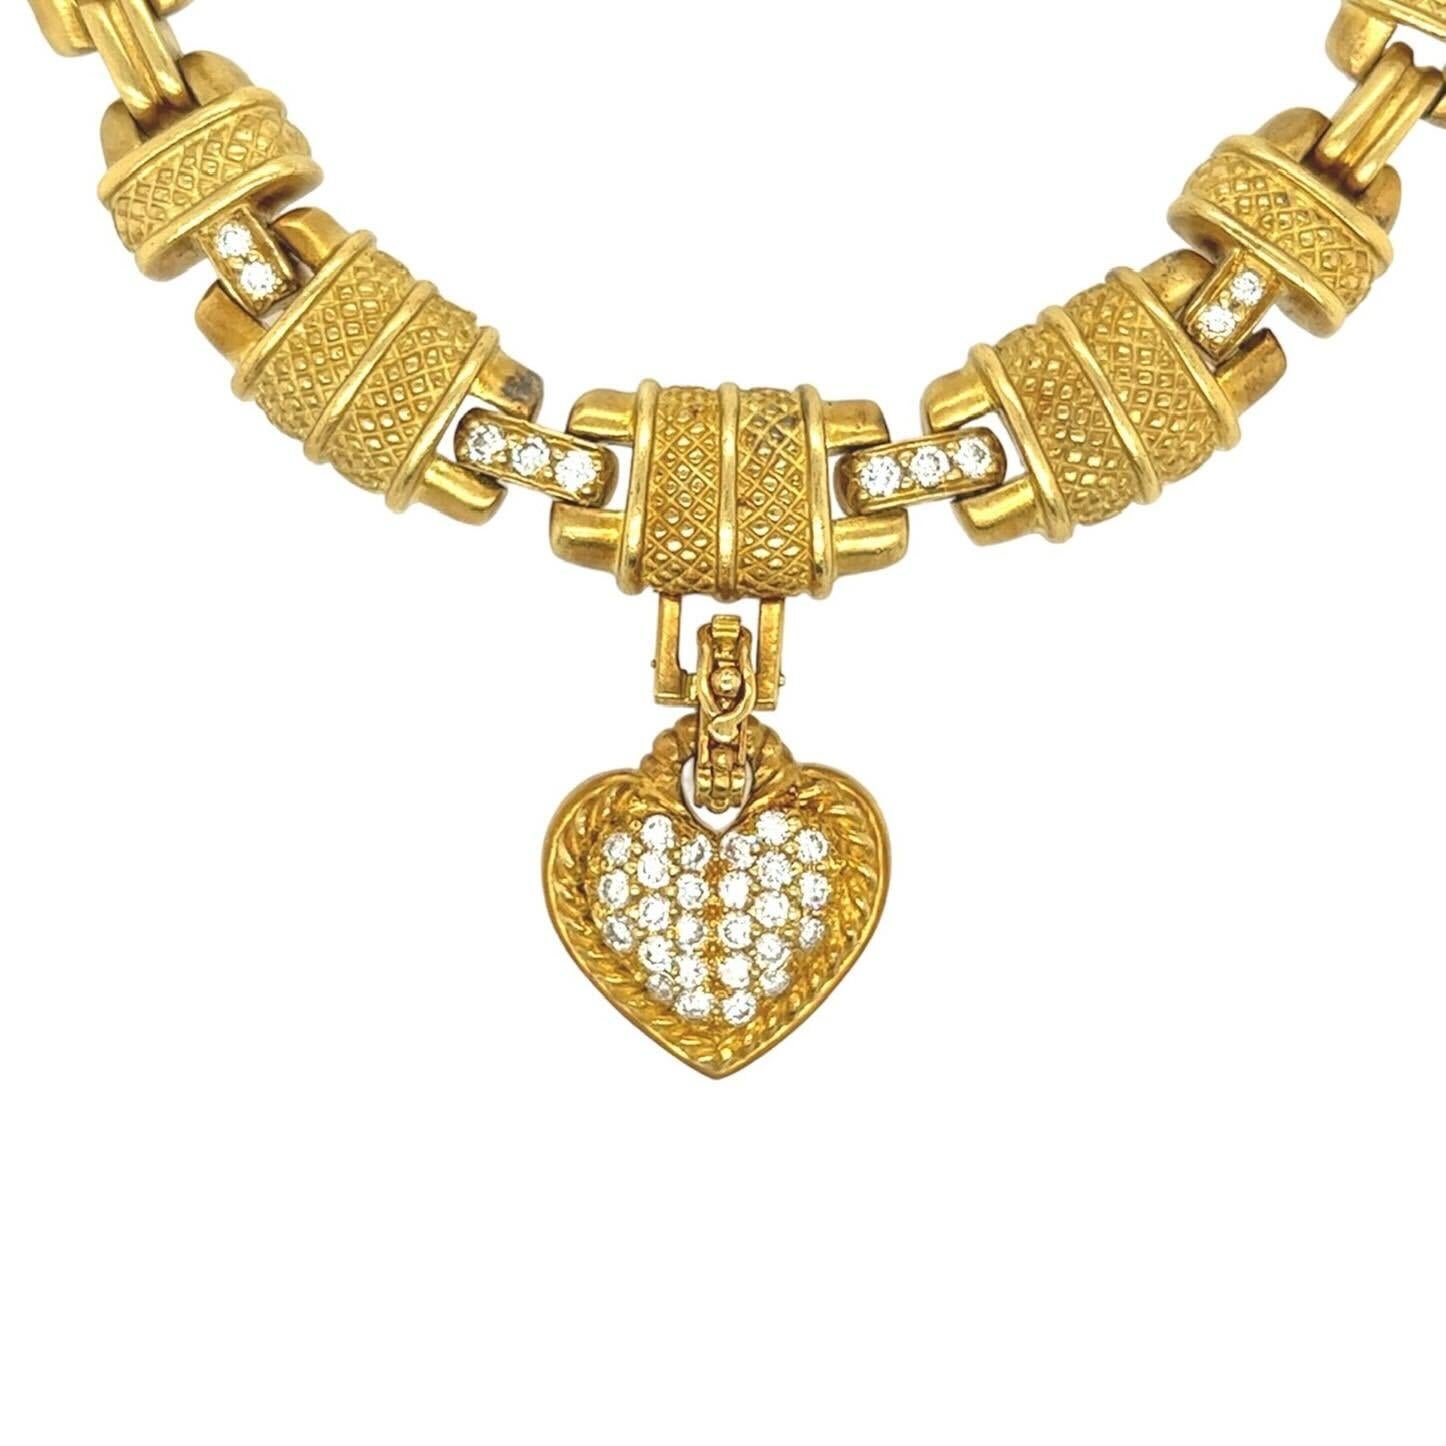 An 18 karat yellow gold, rock crystal, emerald and diamond necklace and two (2) pendants, Judith Ripka.  The necklace formed of textured barrel shaped links alternating with fluted bar links, enhanced at the front by ten (10) round brilliant cut